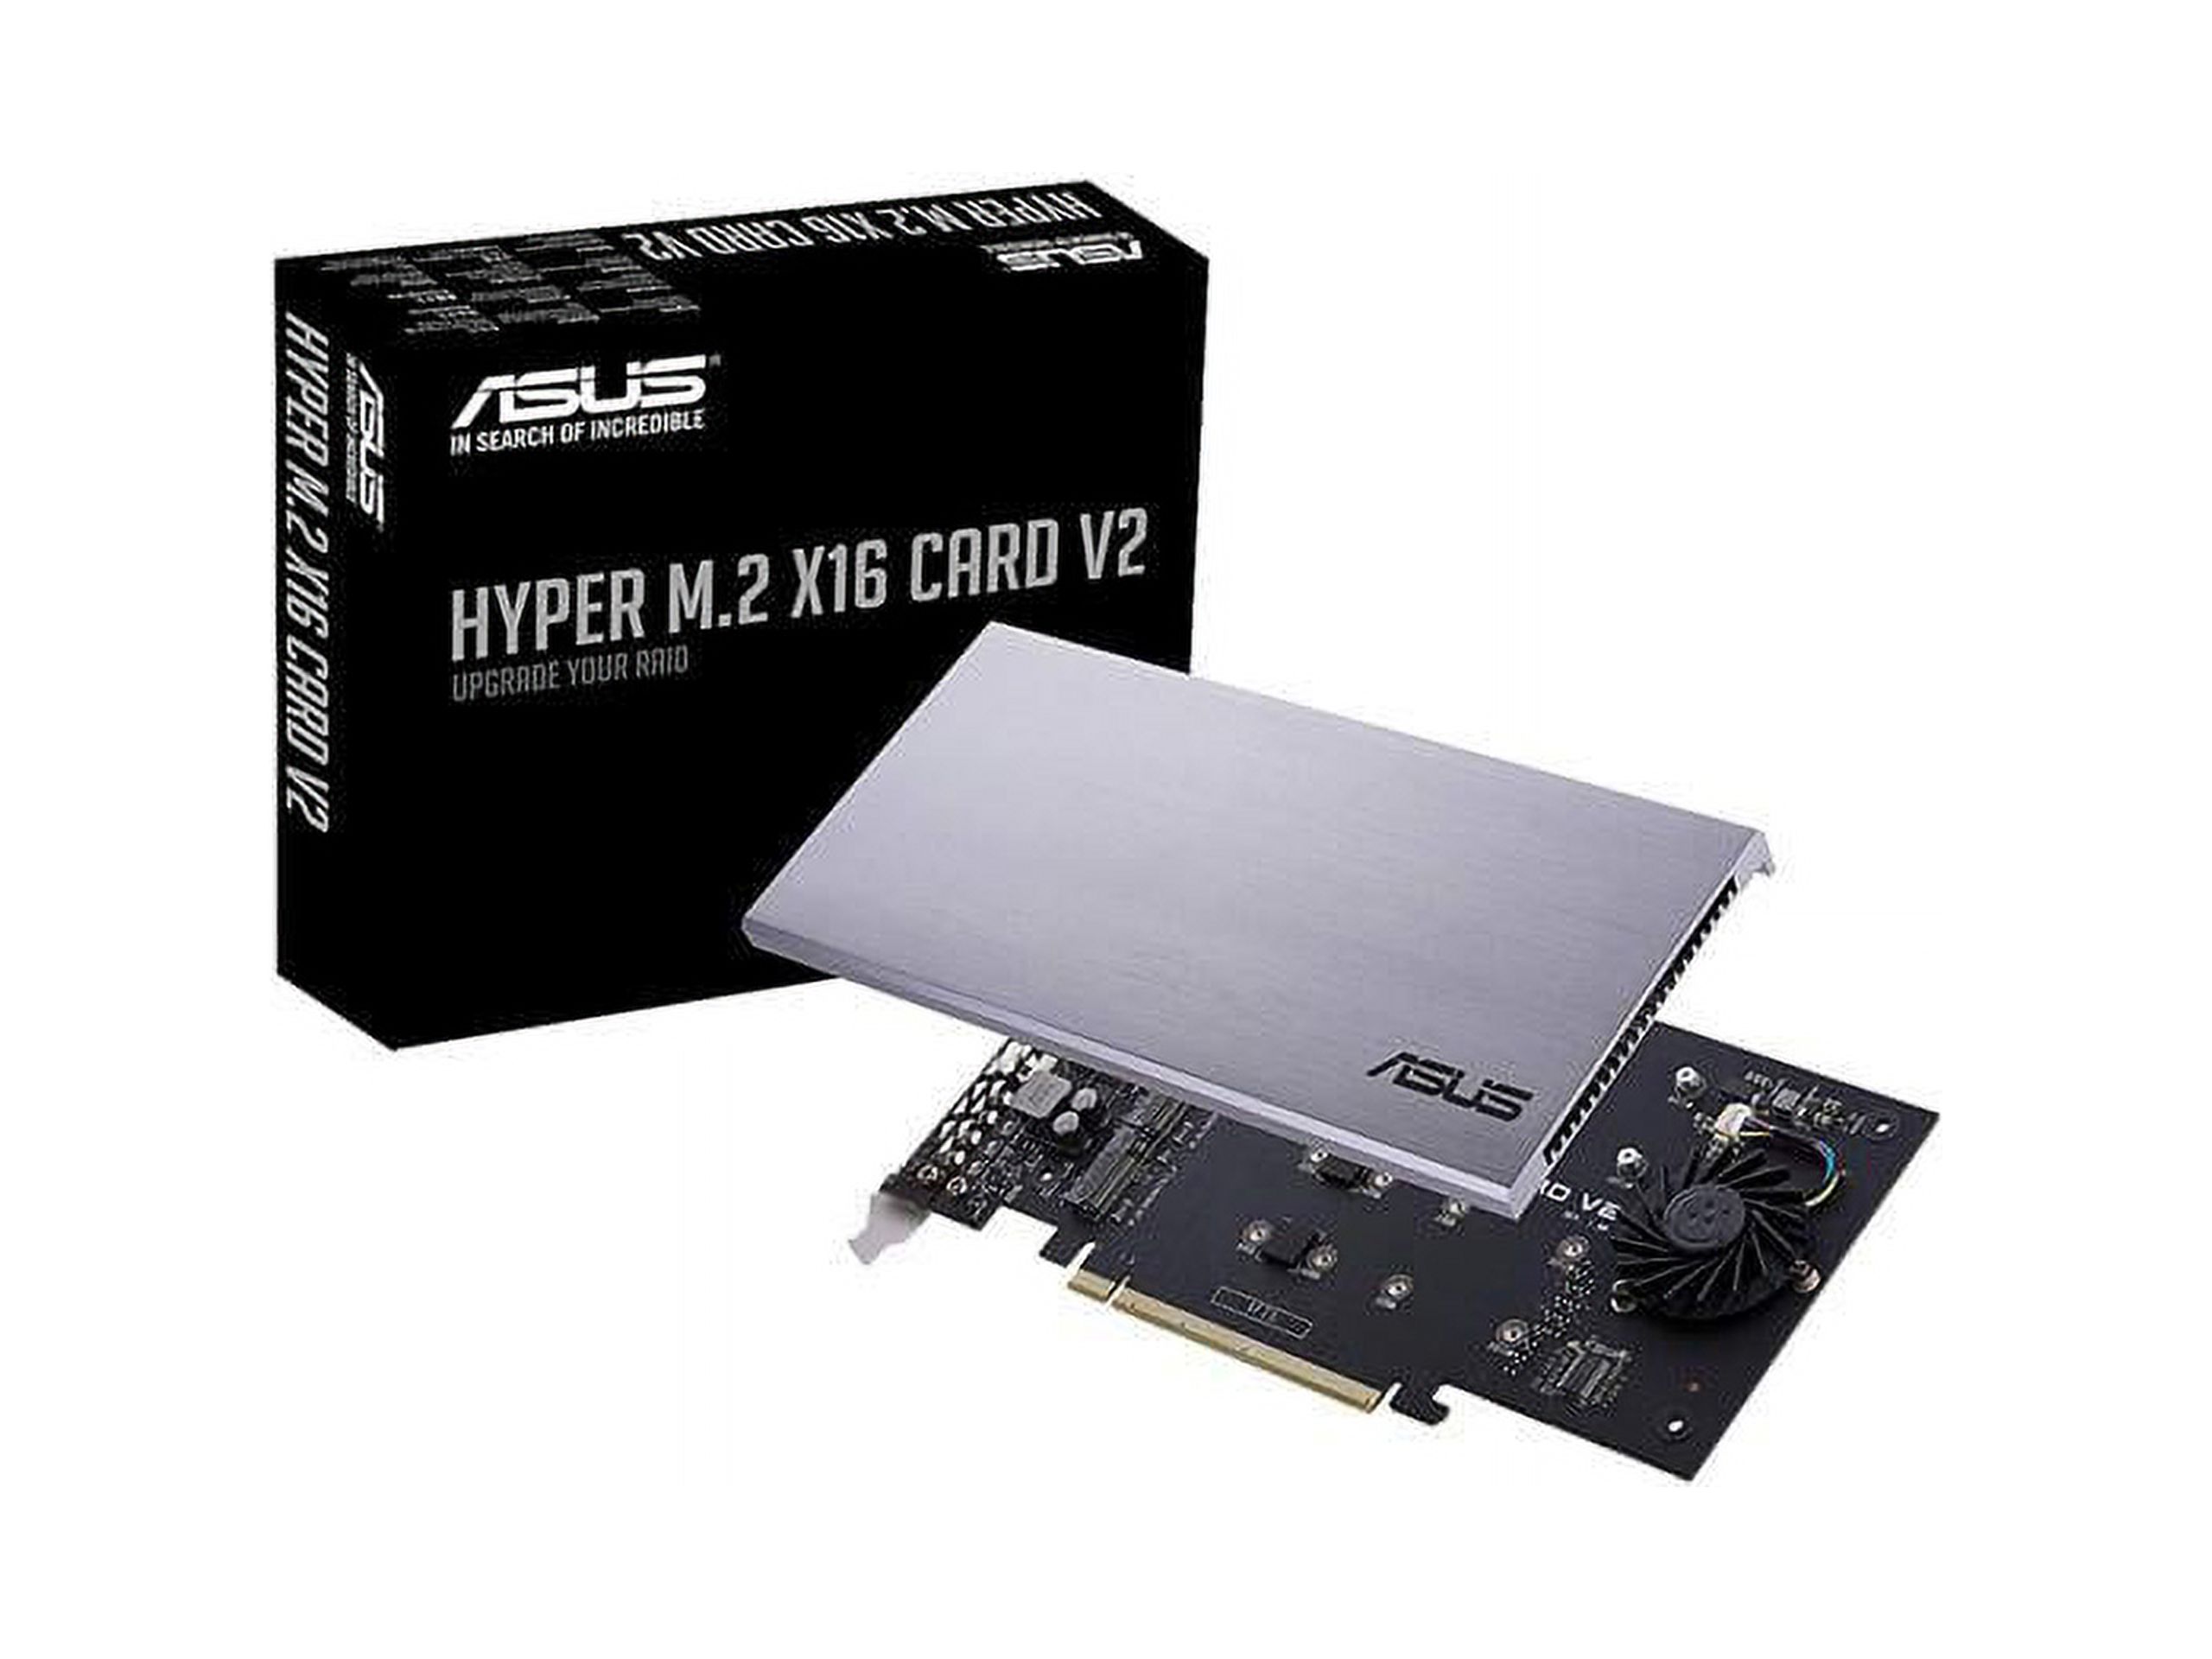 ASUS Hyper M.2 x16 PCIe 3.0 x4 Expansion Card V2 Supports 4 x NVMe M.2 (2242/2260/2280/22110) Up to 128 Gbps for Intel VROC and AMD Ryzen Threadripper NVMe RAID - image 5 of 5